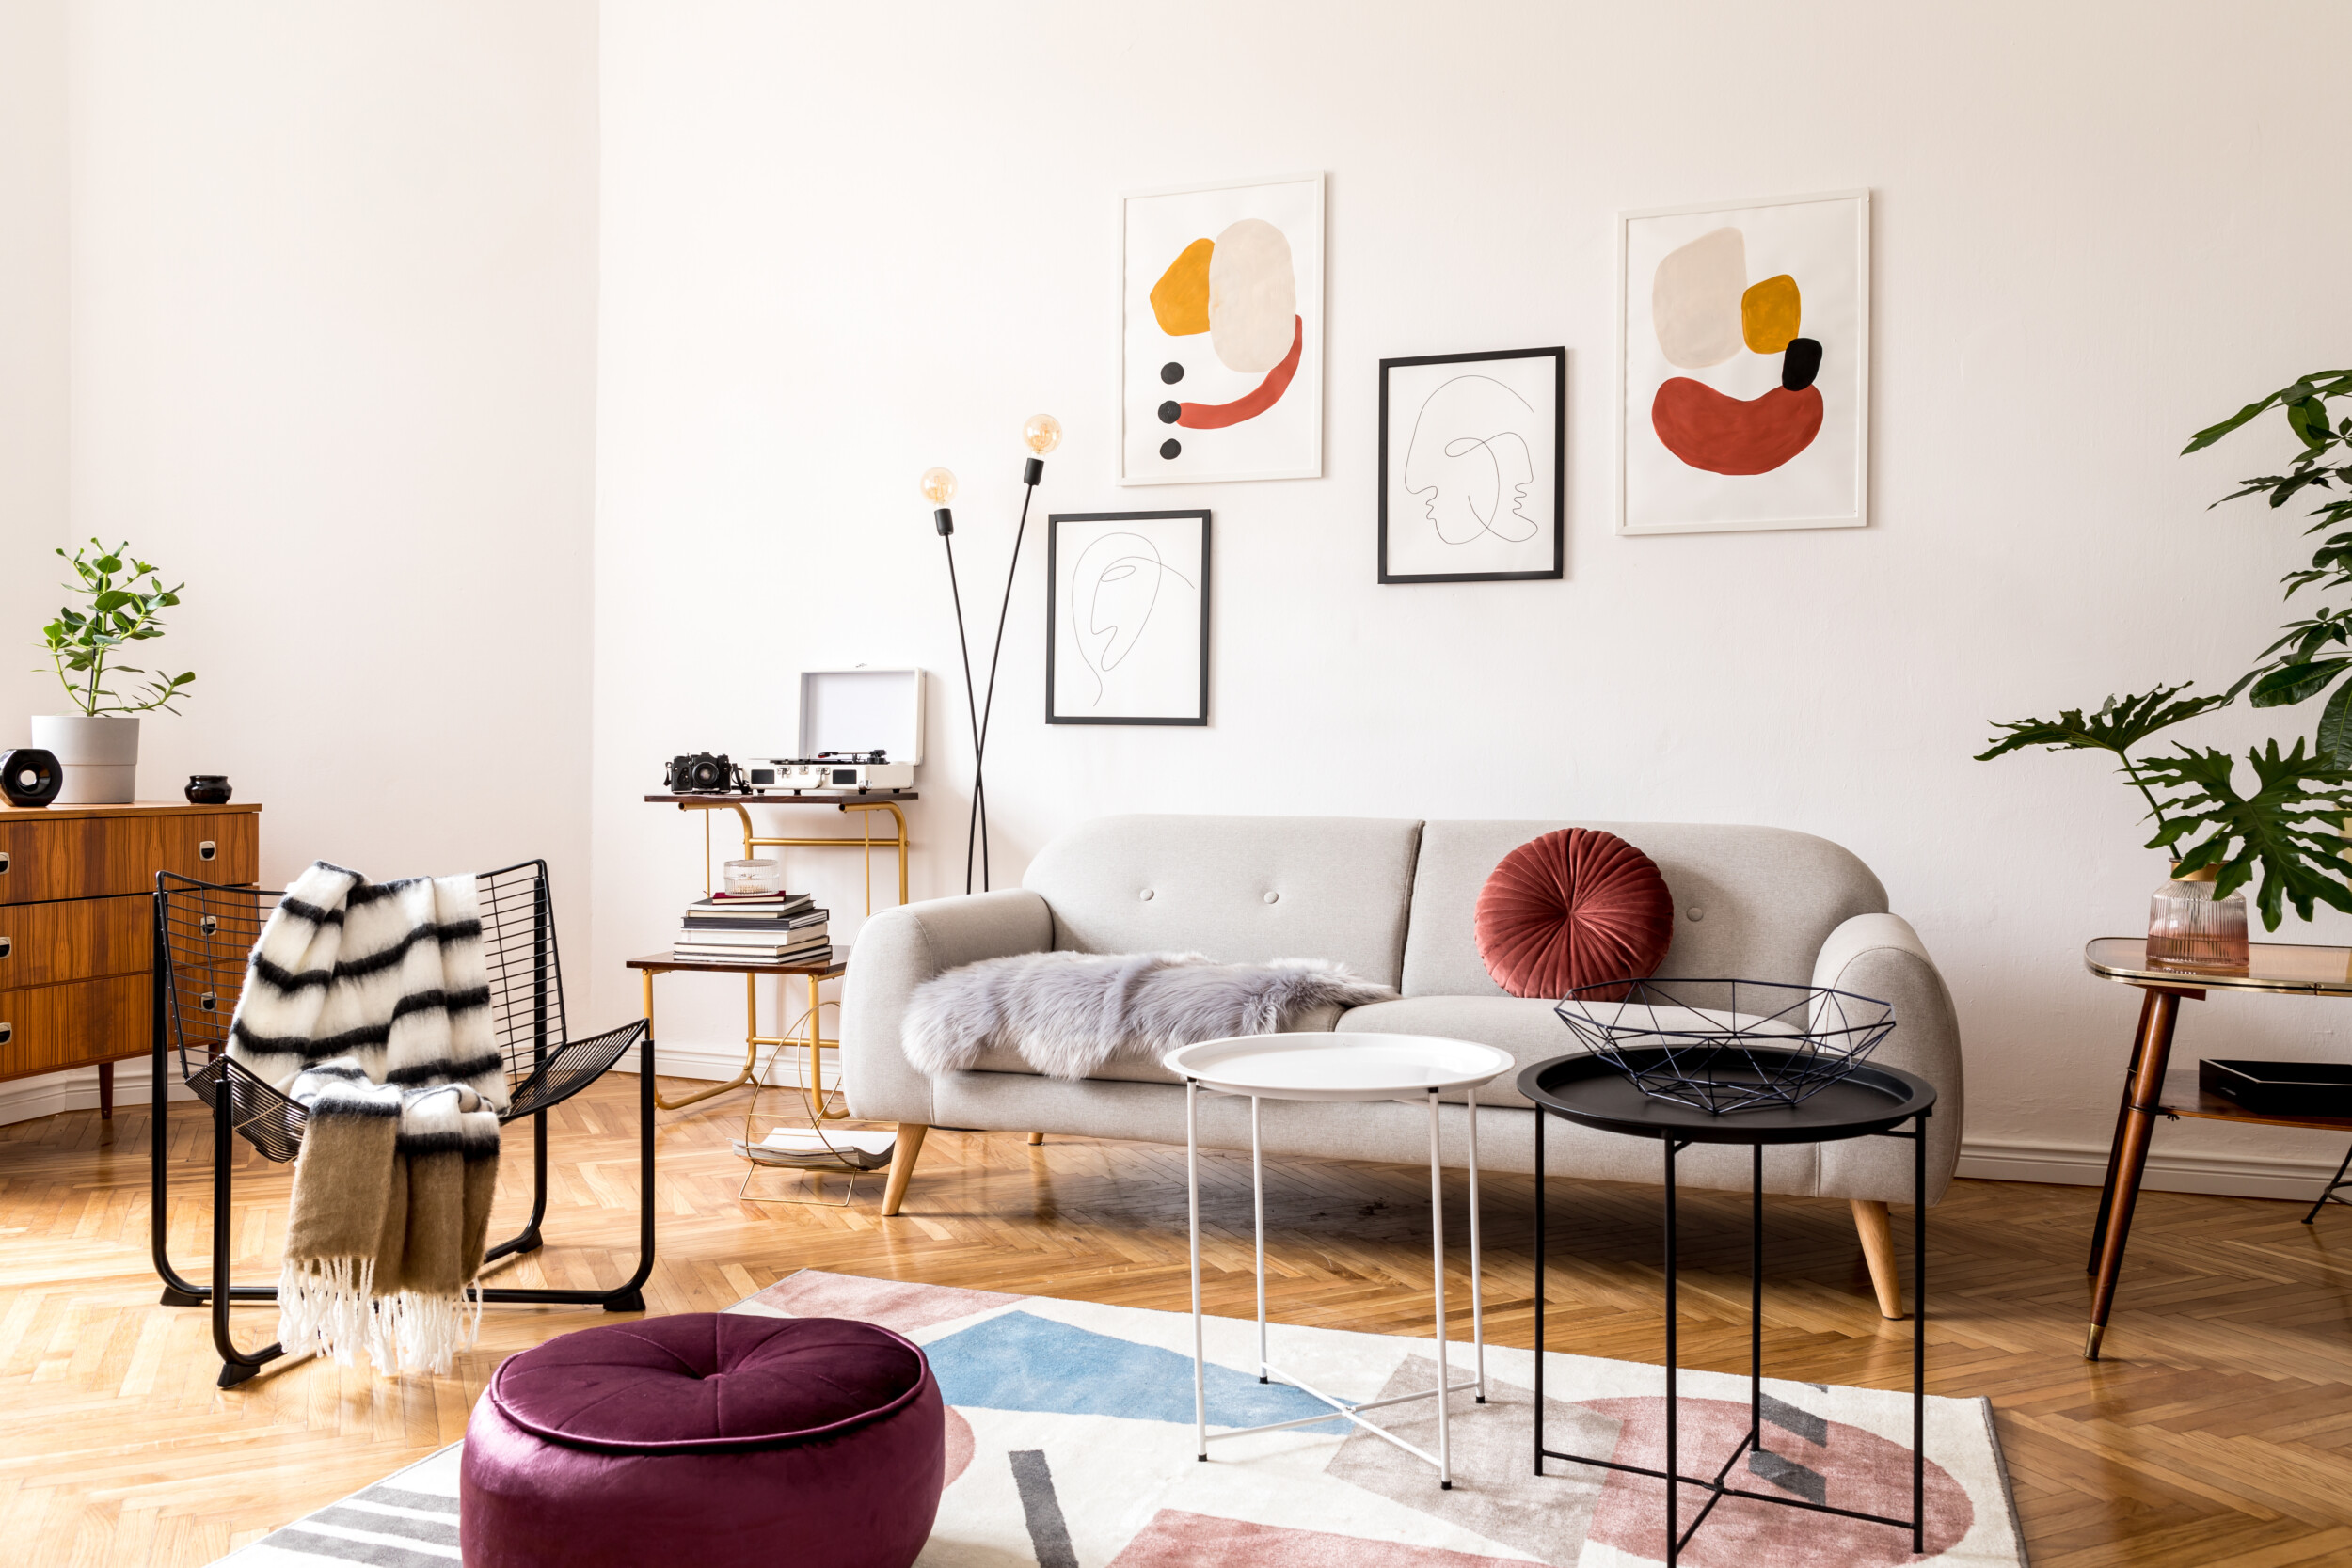 How to Decorate With Mid-Century Modern on a Budget